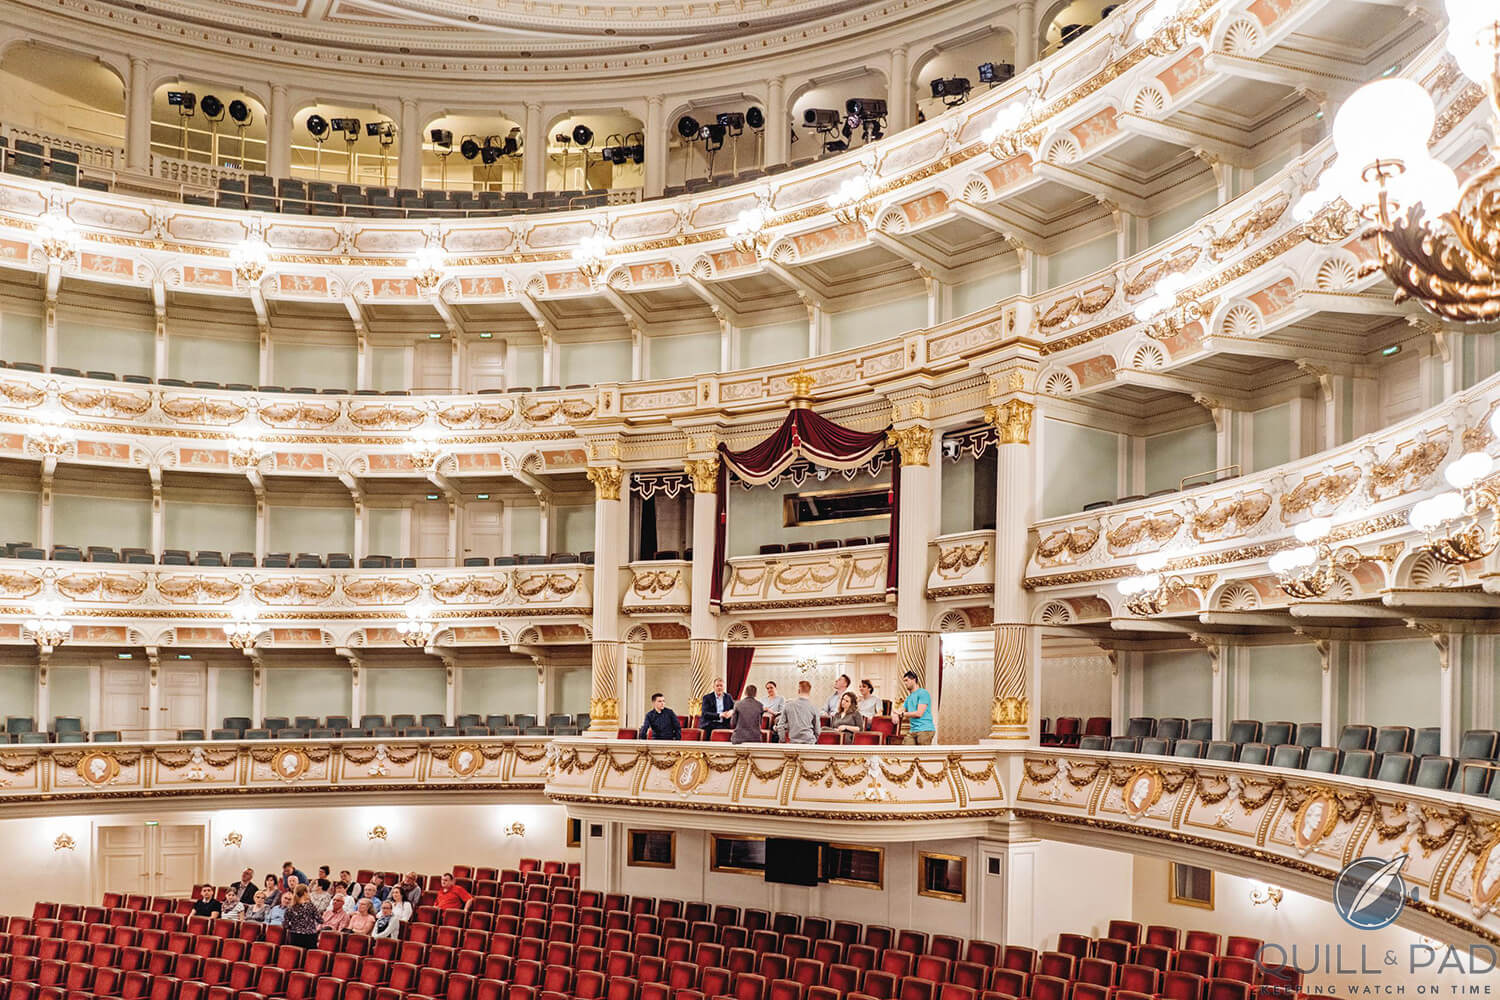 The group takes in the majesty of Dresden’s Semper Opera, home to A. Lange & Söhne’s Five-Minute Clock (photo courtesy Erik Gross/A. Lange & Söhne)